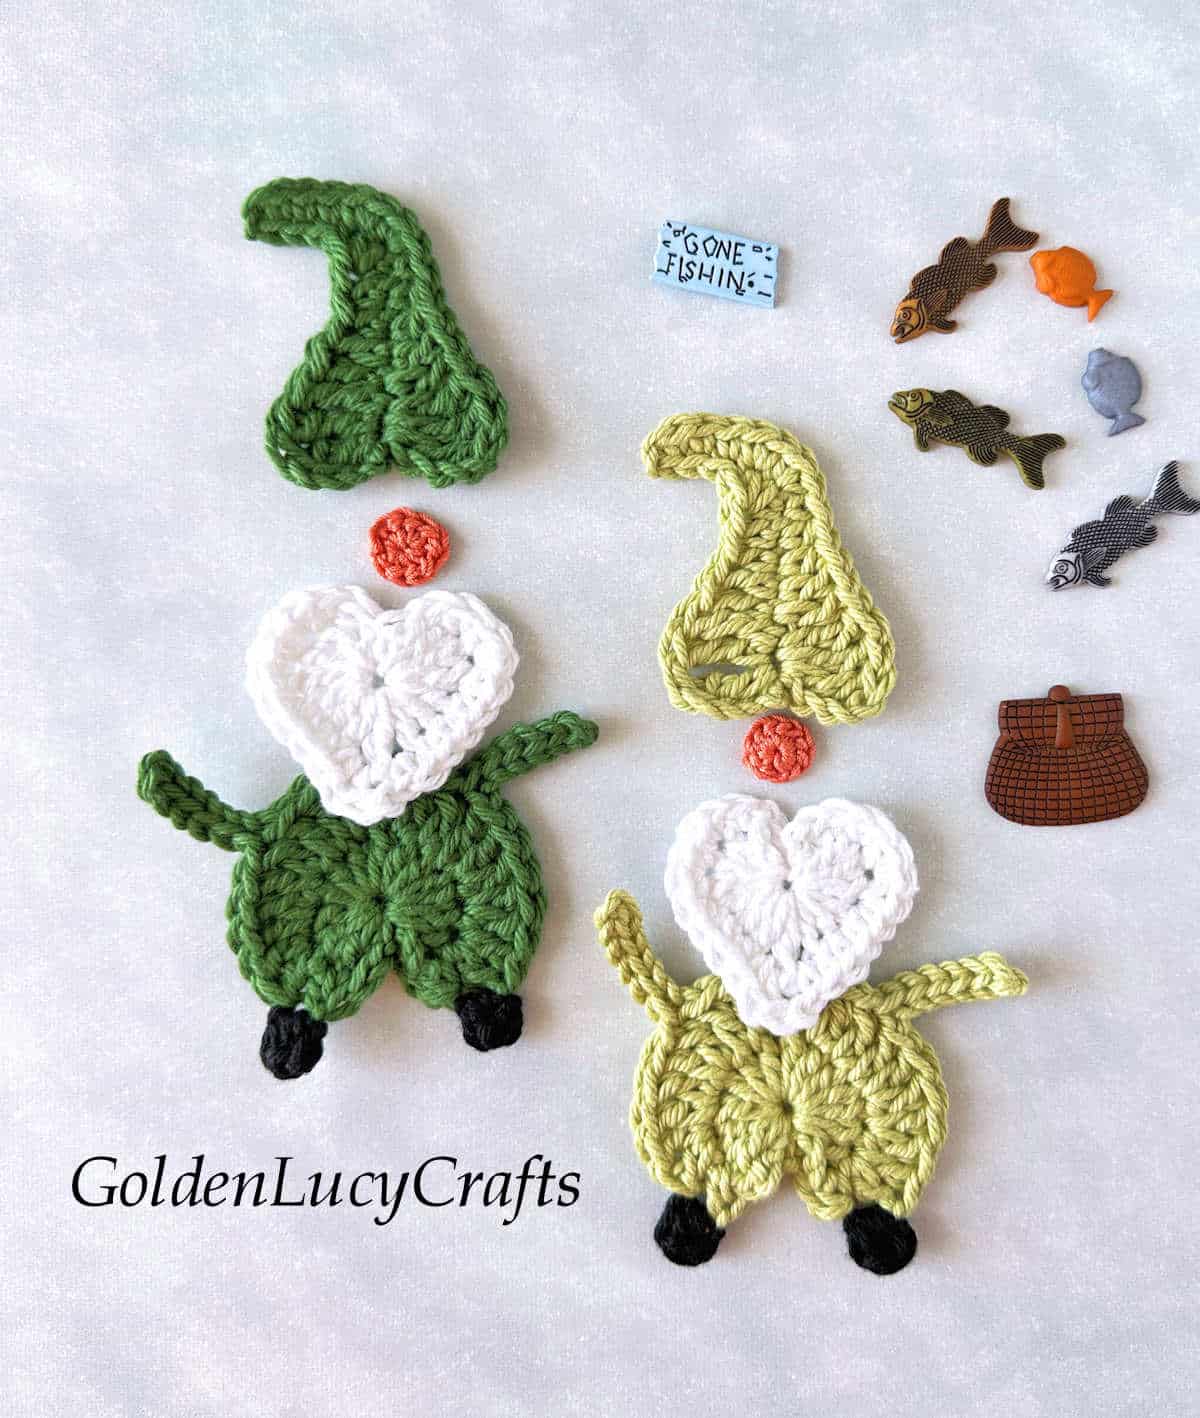 Parts of crochet gnomes and fishing themed craft buttons.